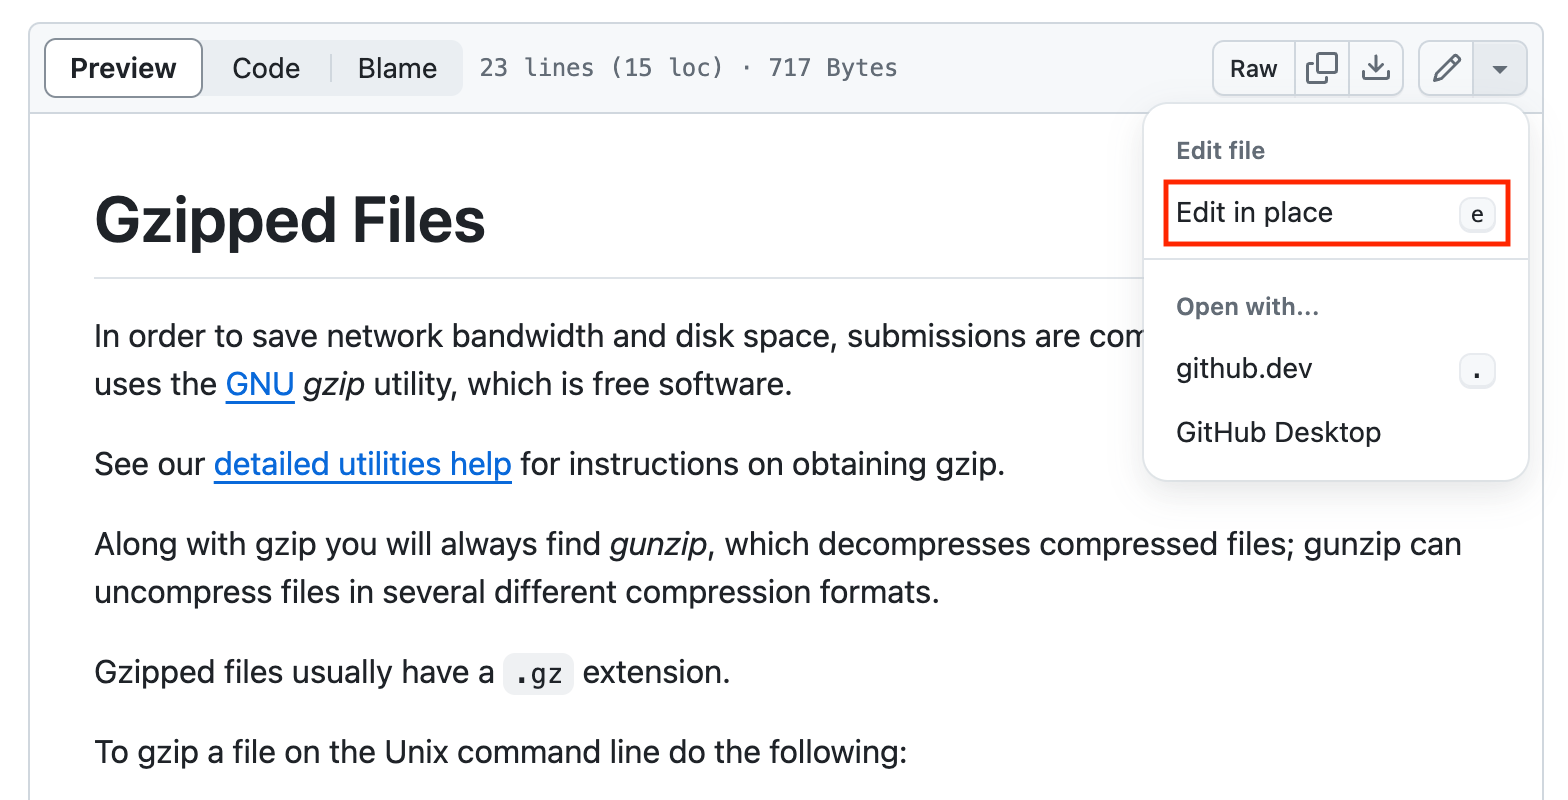 Screenshot of a page in Github and the location of the edit icon